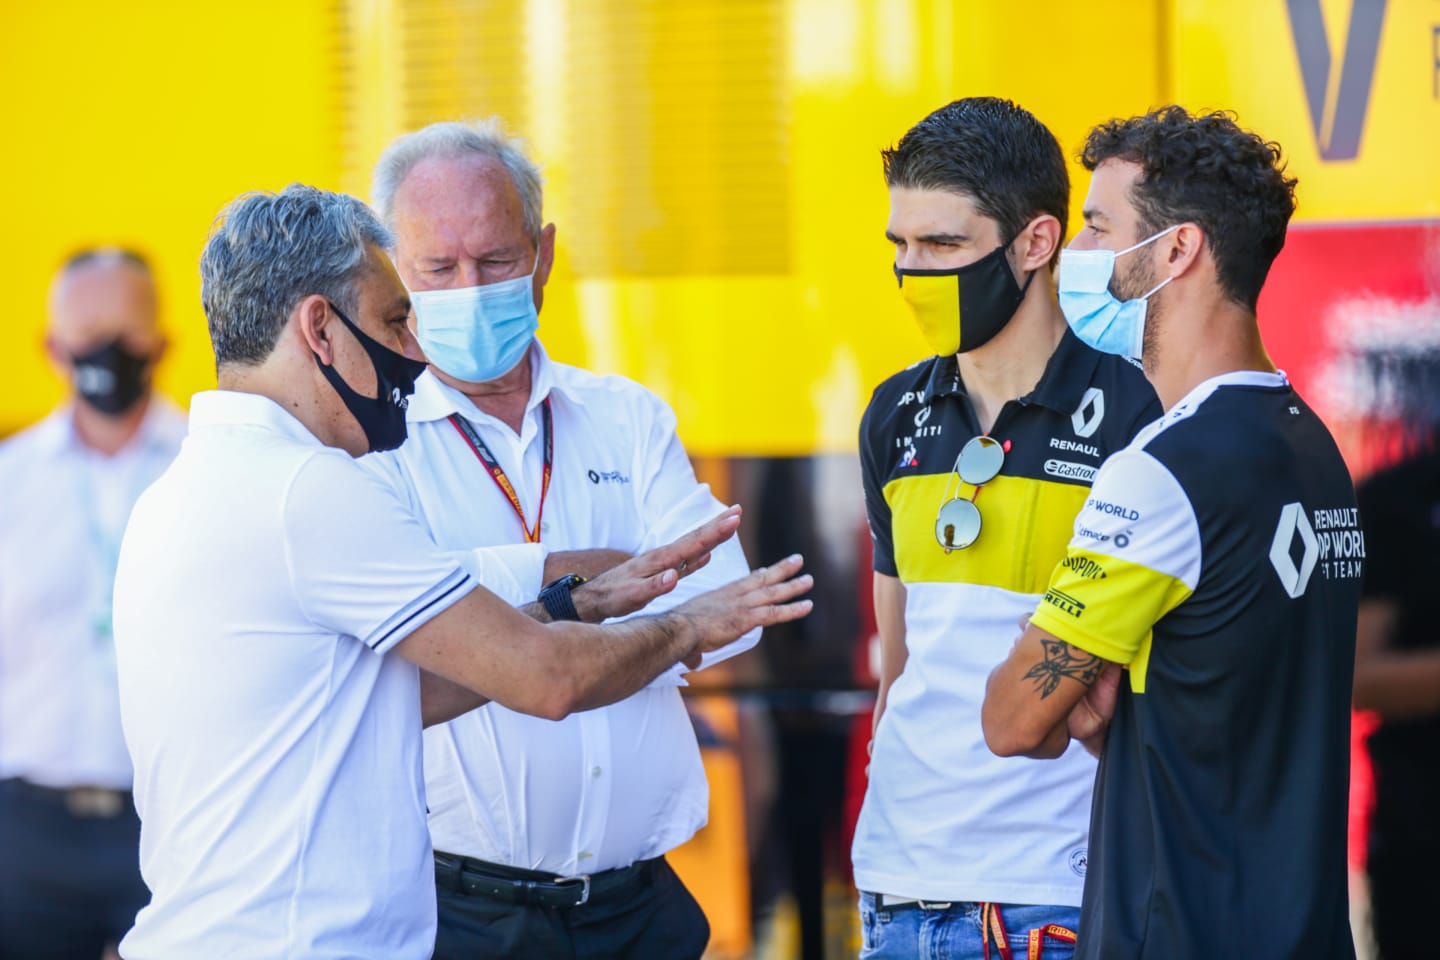 BARCELONA, SPAIN - AUGUST 15: The new CEO of Renault Luca de Meo of Italy chats with Jerome Stoll